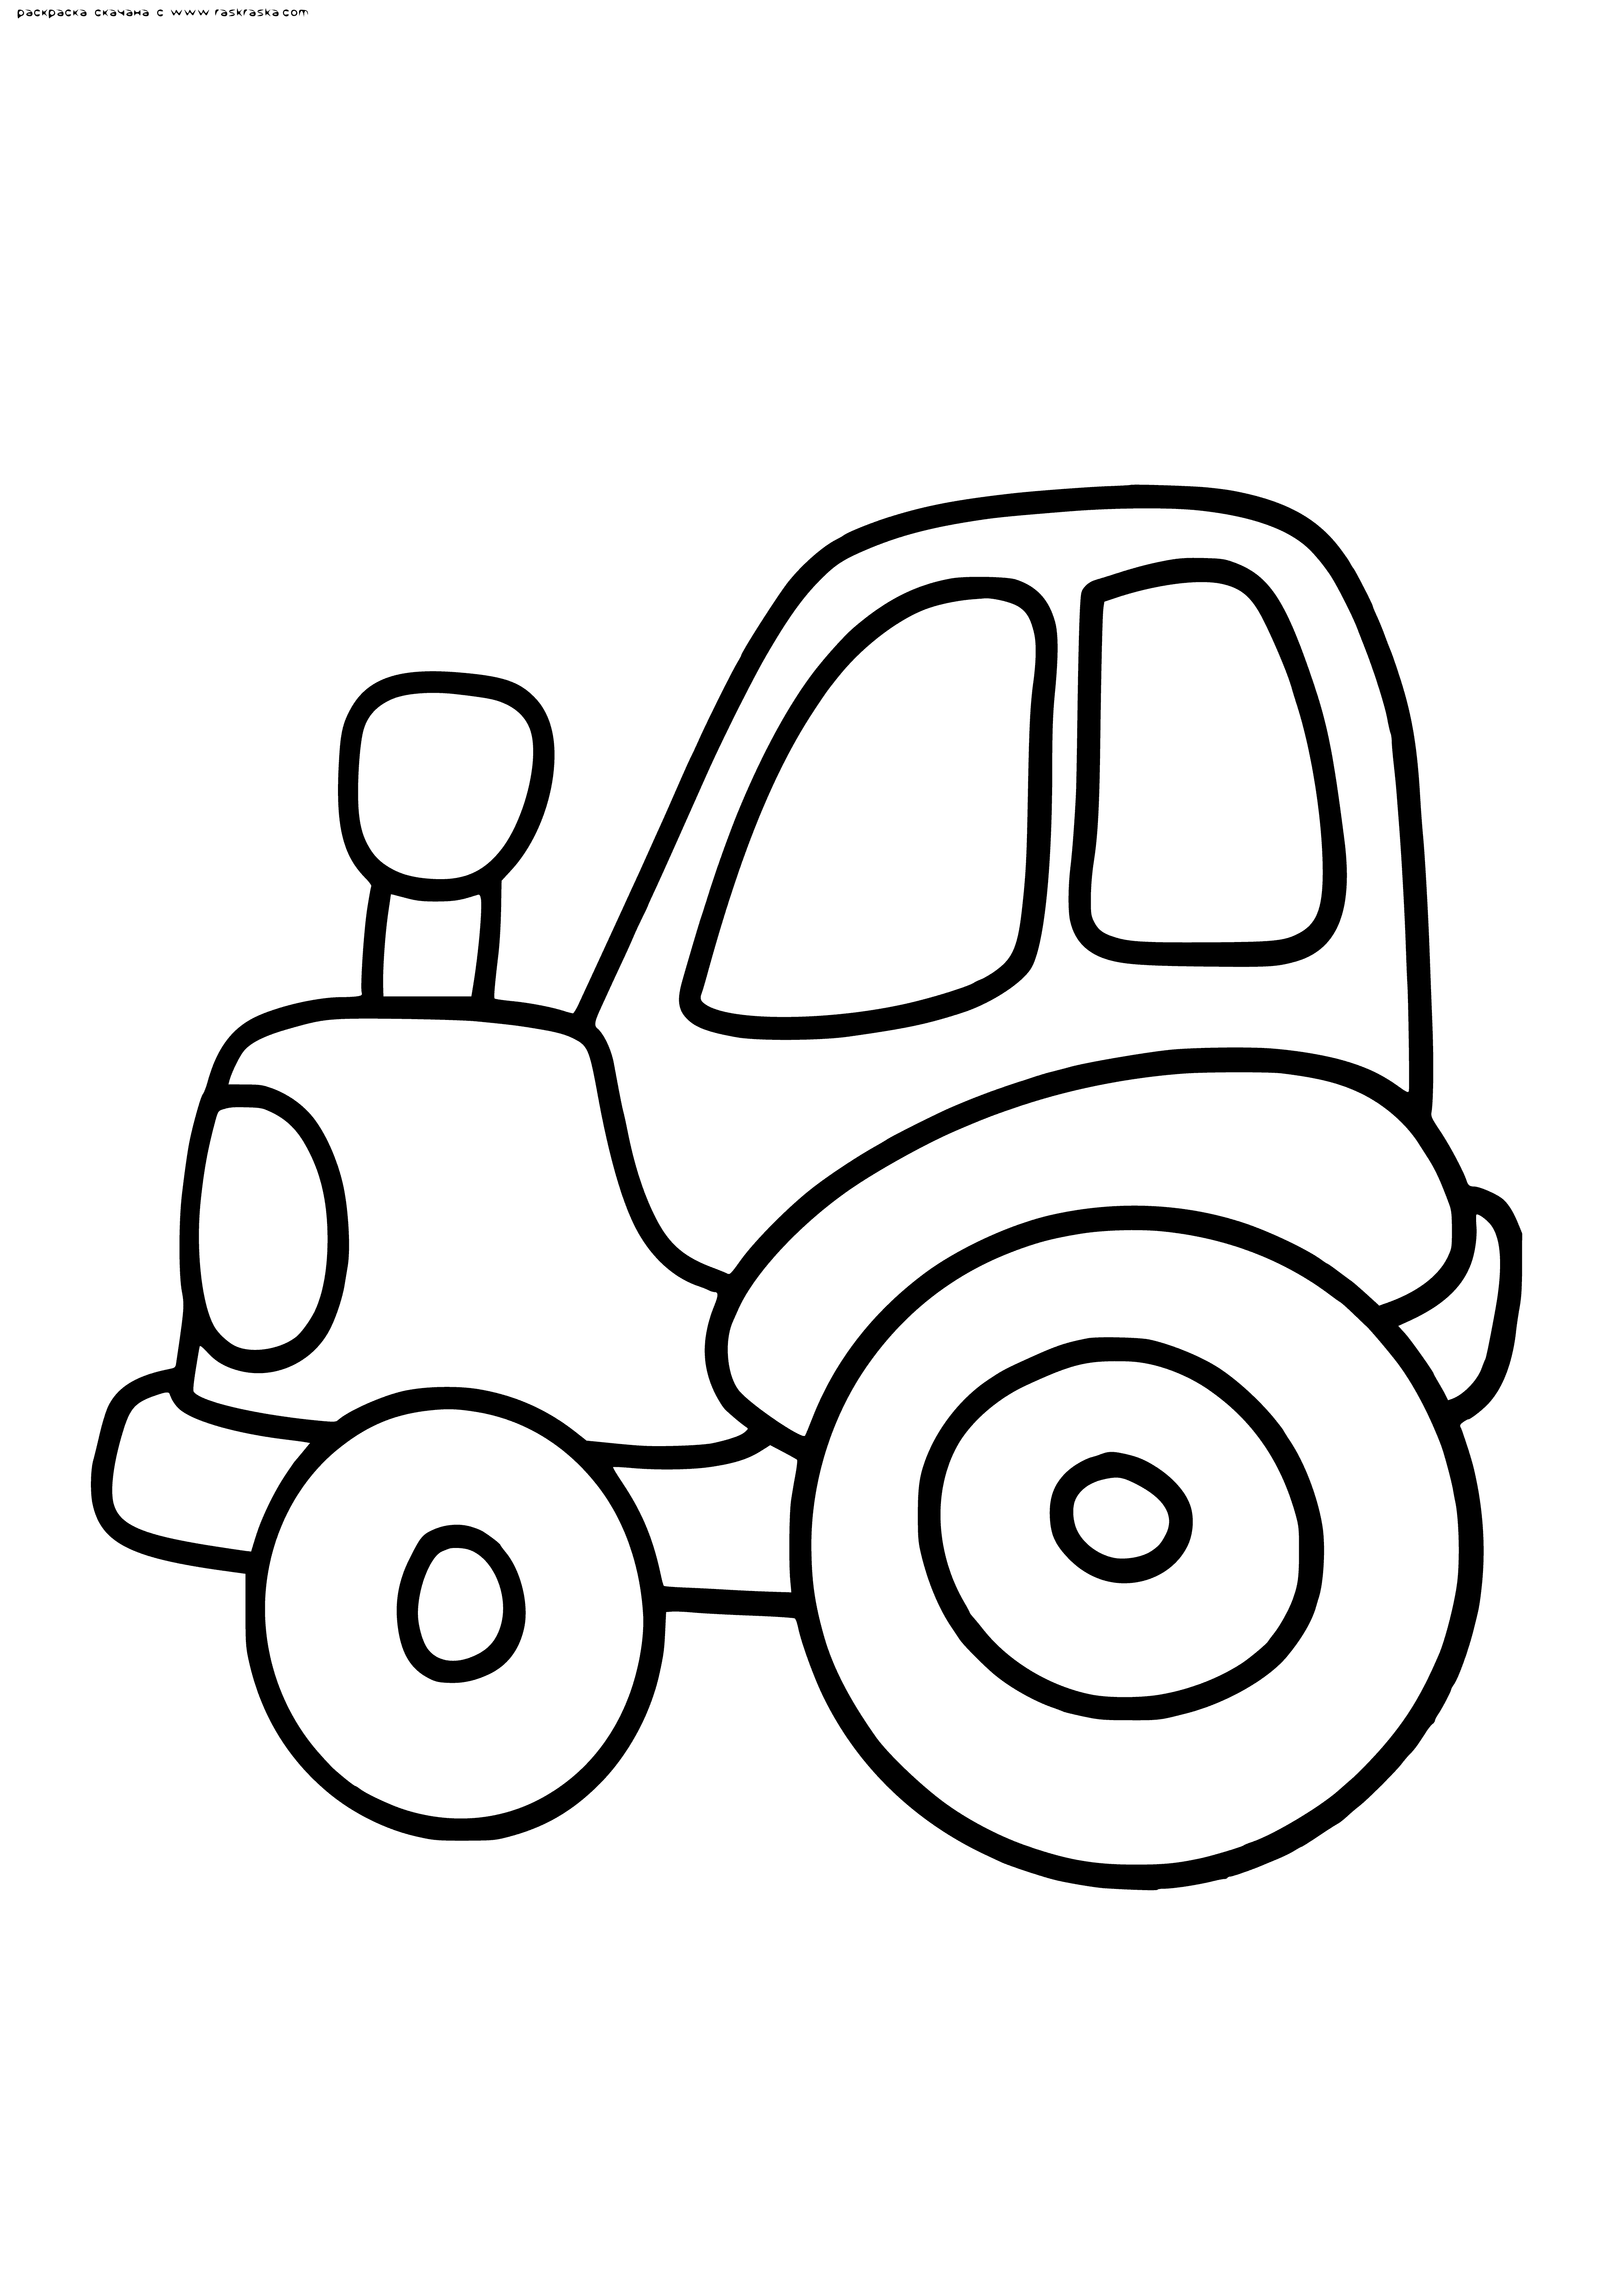 Tractor coloring page